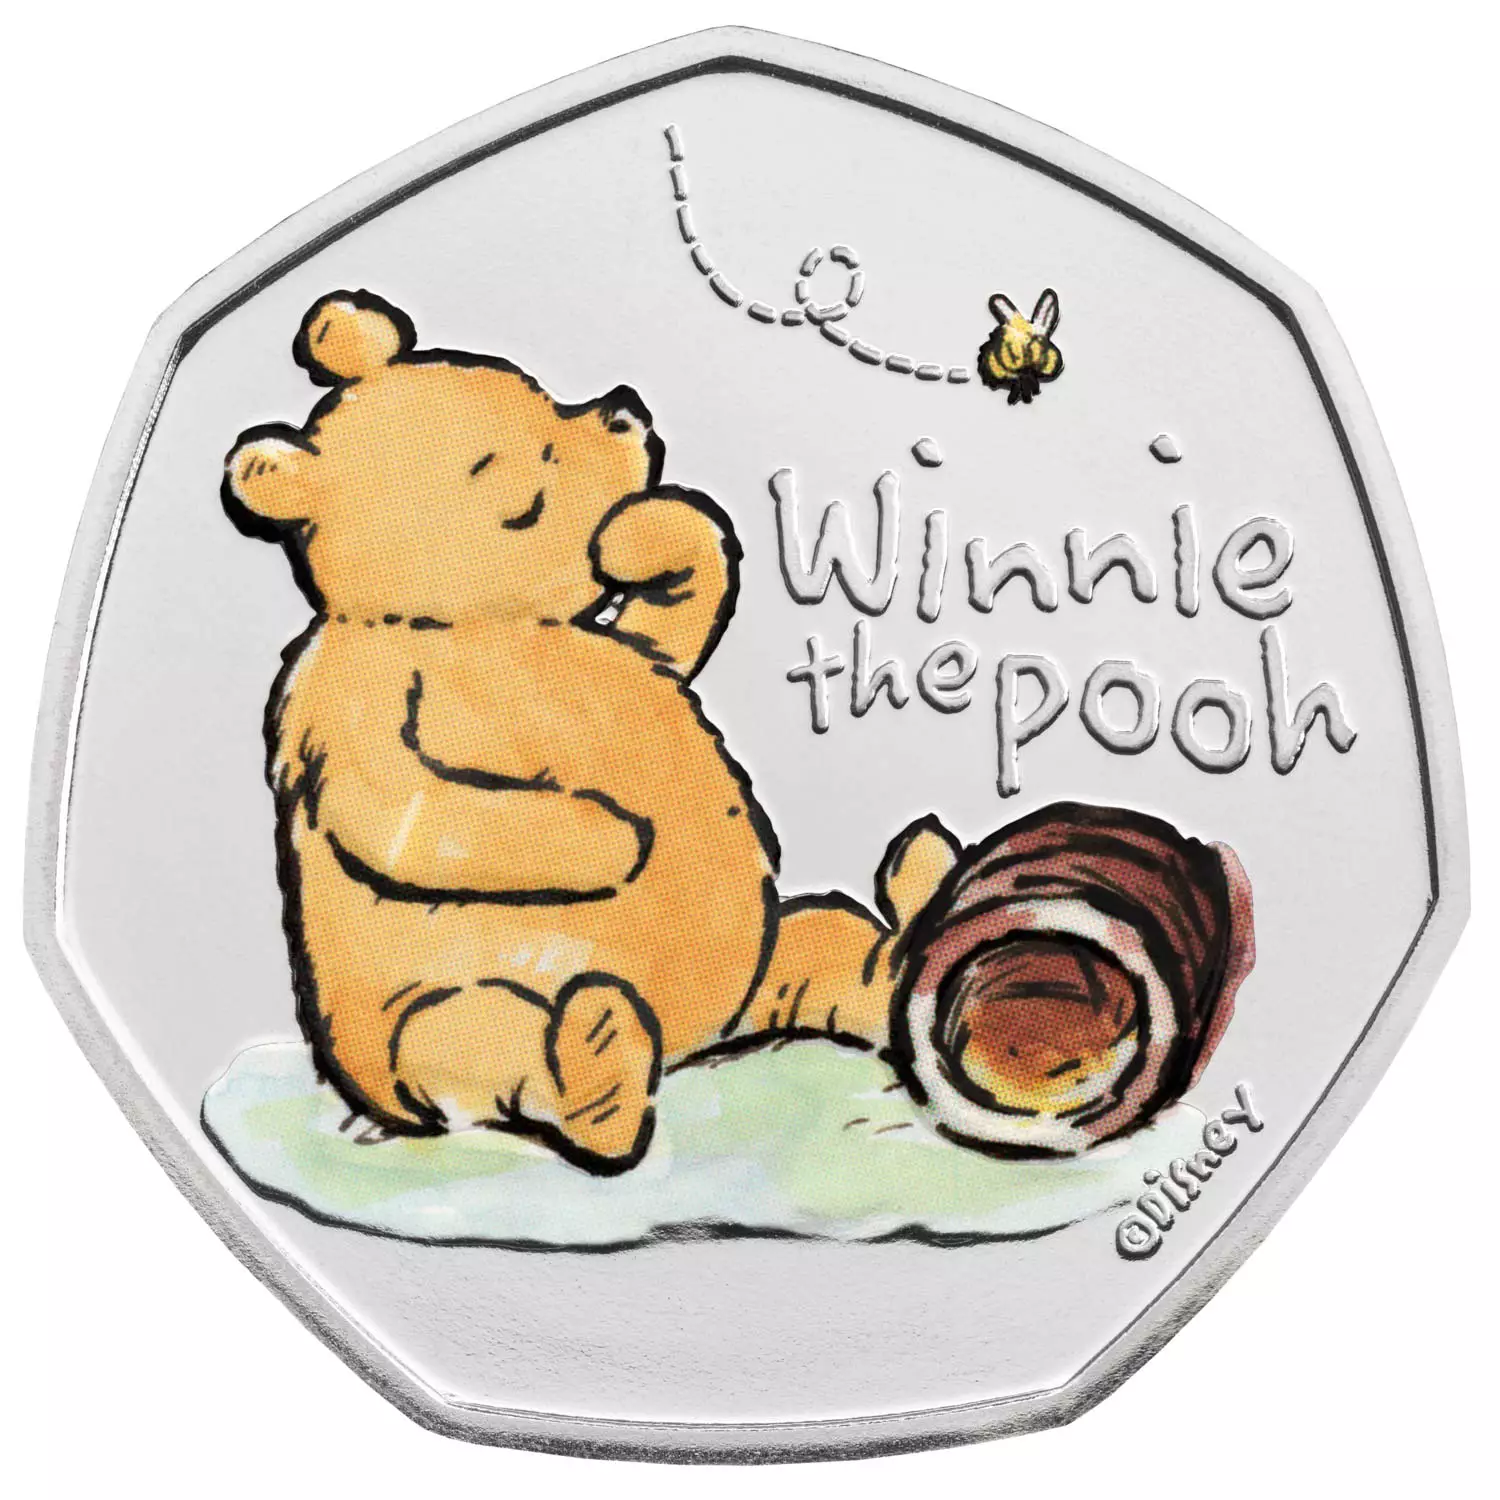 The coin features original Winnie-The-Pooh illustrations (